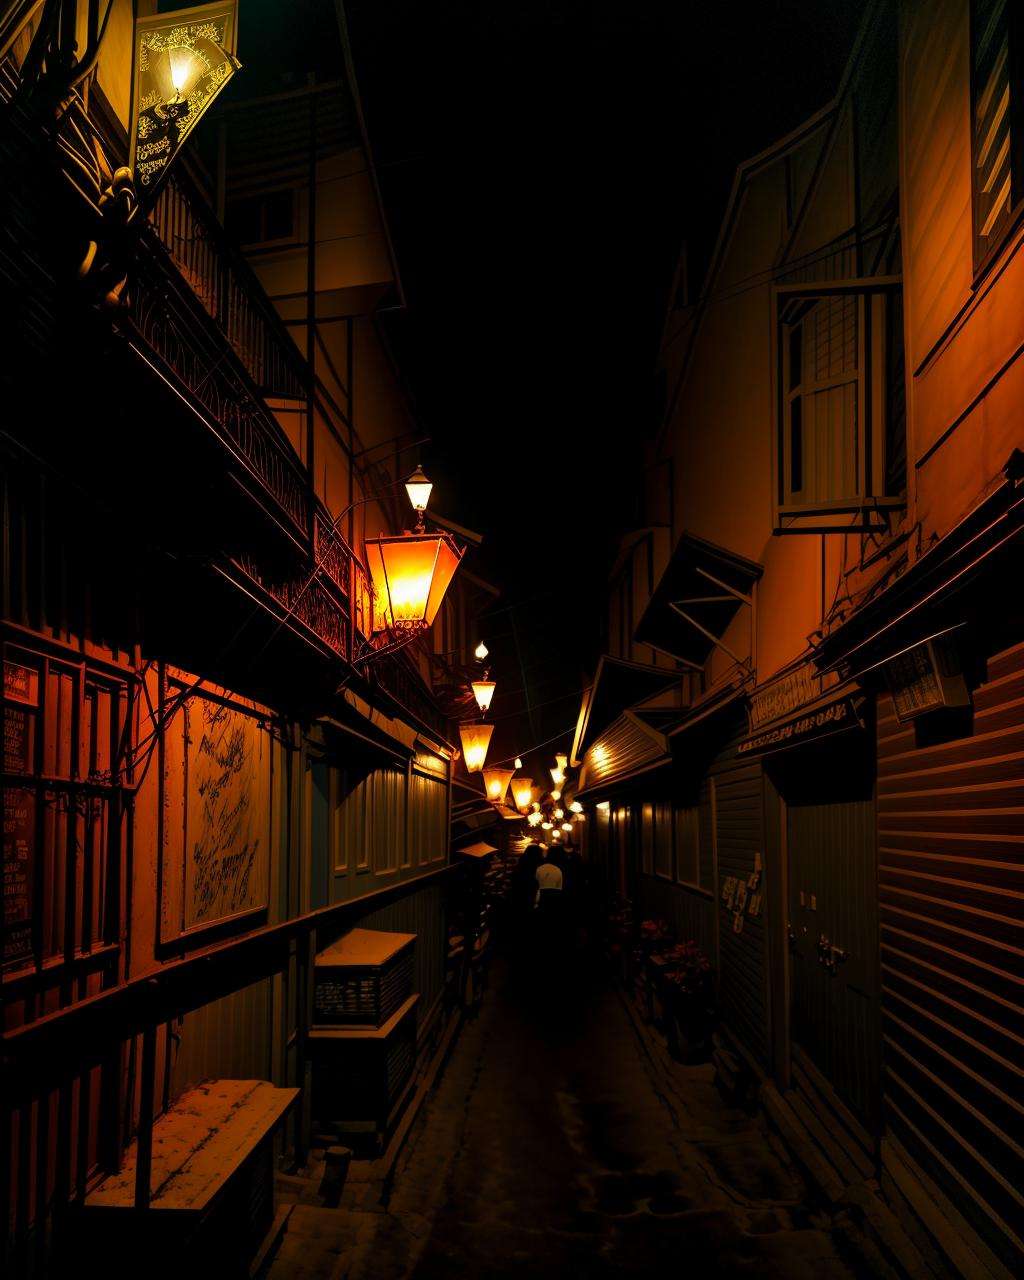 a person walking down a dark alley way at night with a street light above them